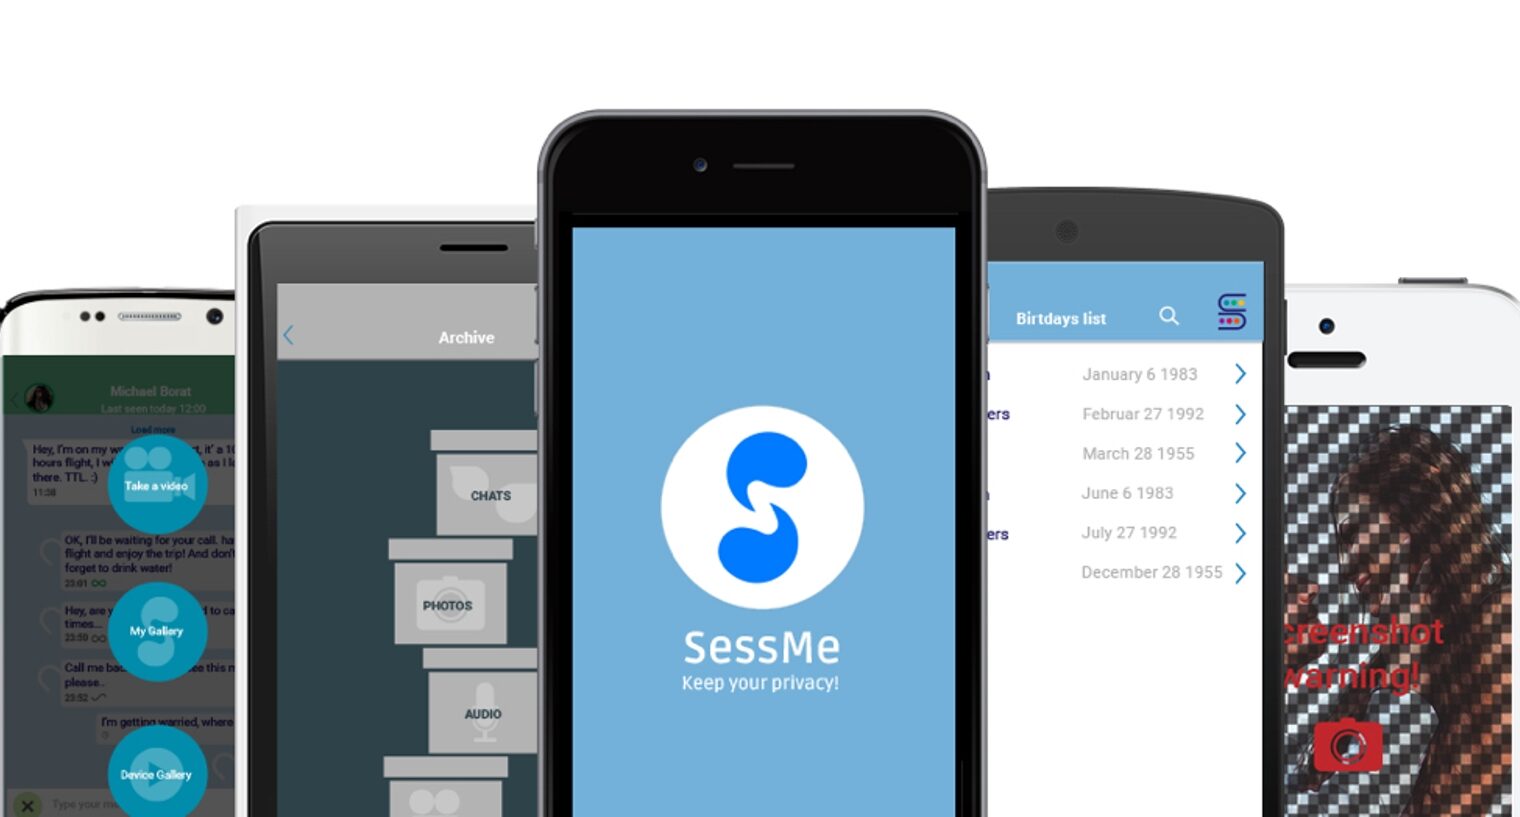 SessMe lets you erase photos and texts you’ve sent, encrypt messages and do many other functions related to privacy. Photo: courtesy